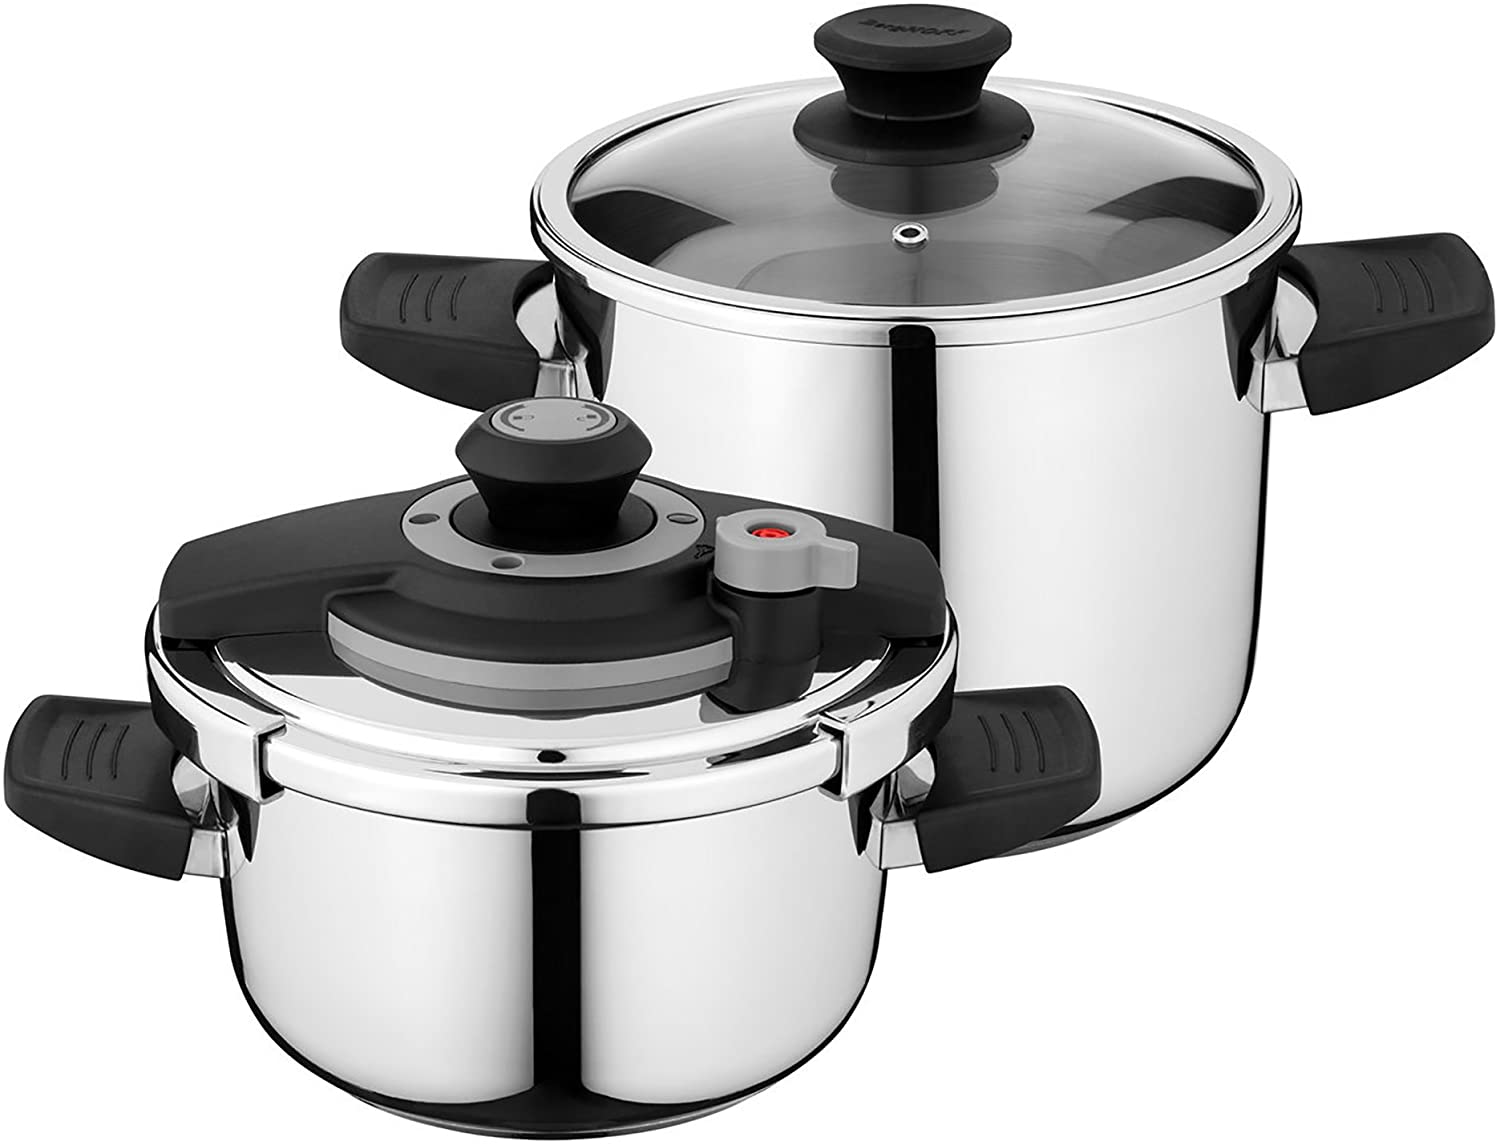 Berghoff Vita Stainless Steel Pressure Cooker with Lid Lock, 7.4 qt, Suitable for All Stoves